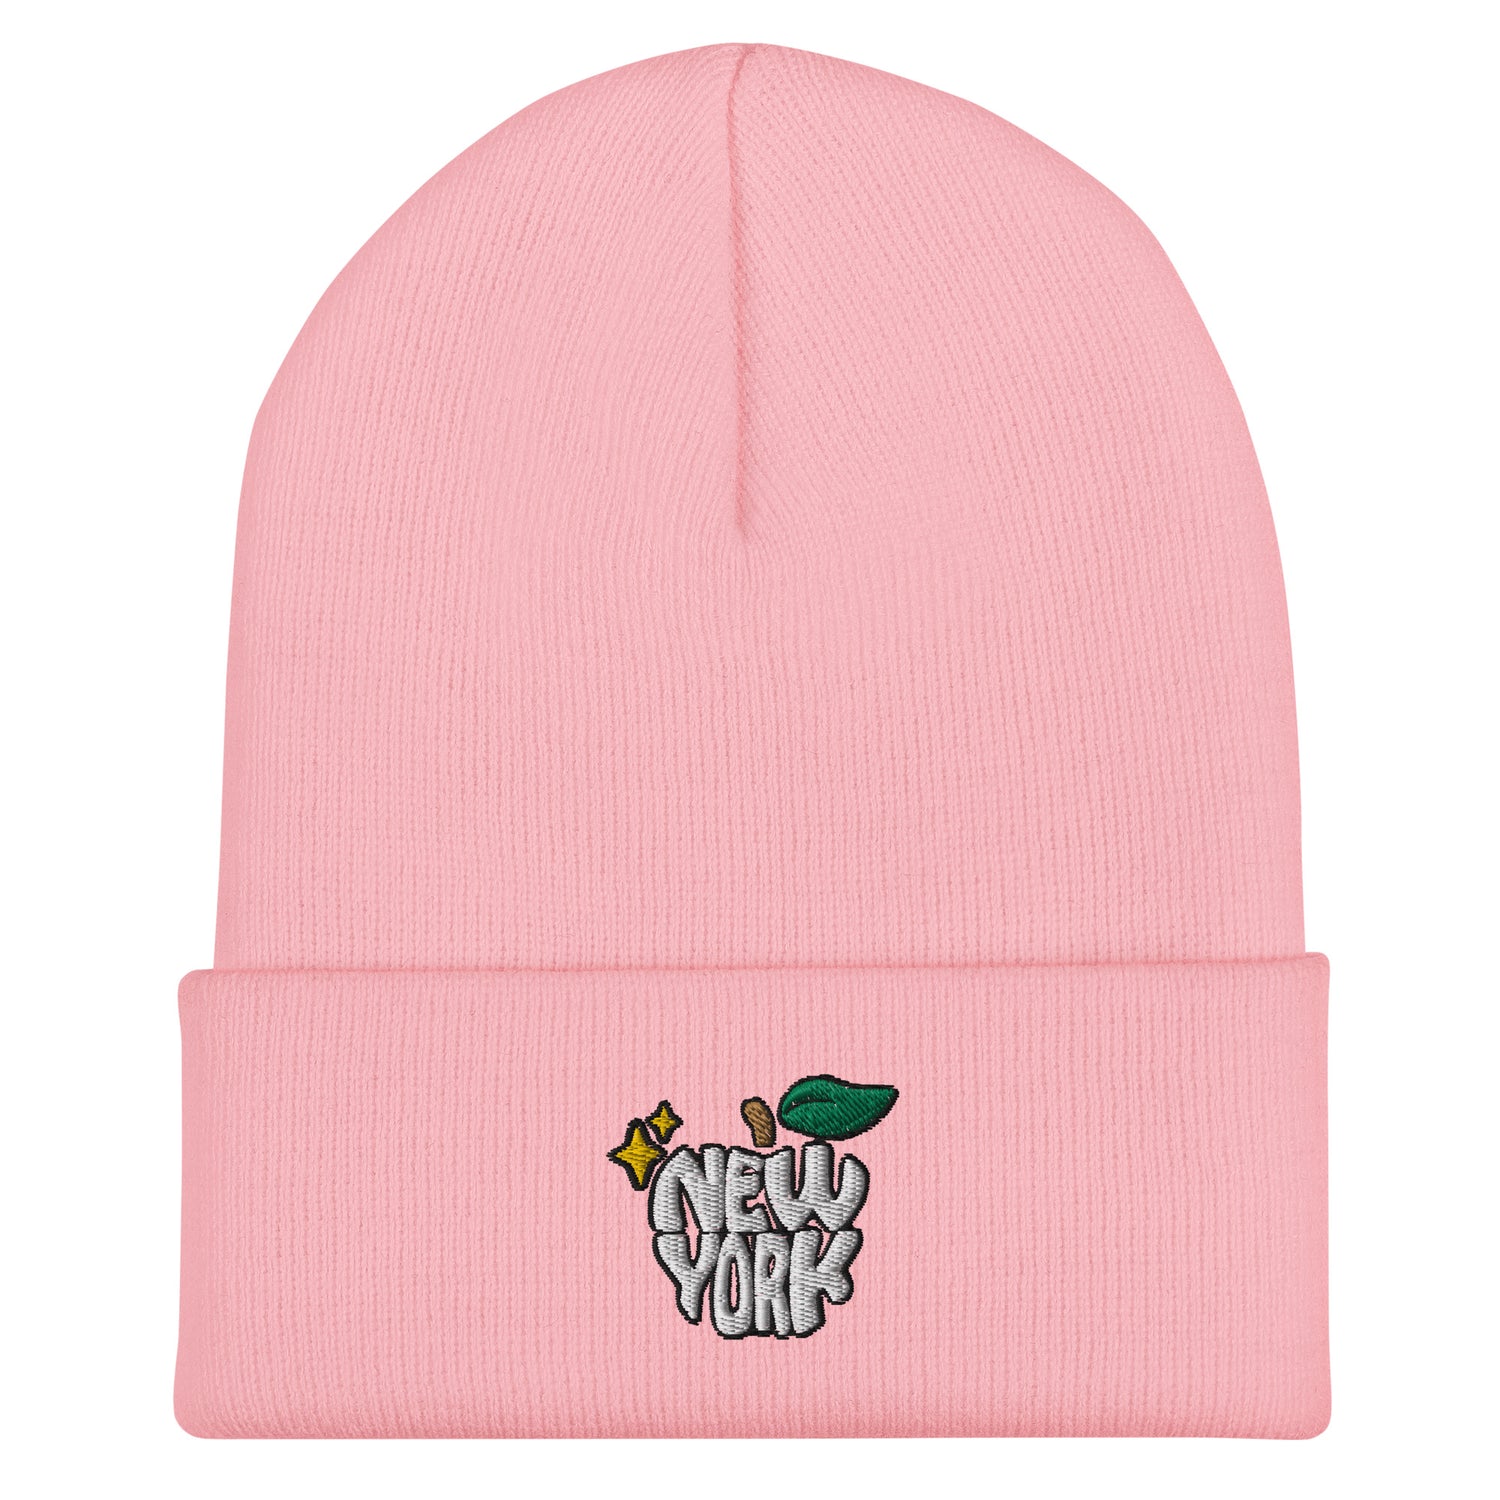 New York Apple Logo Embroidered Pink Cuffed Beanie Hat Scattered Streetwear